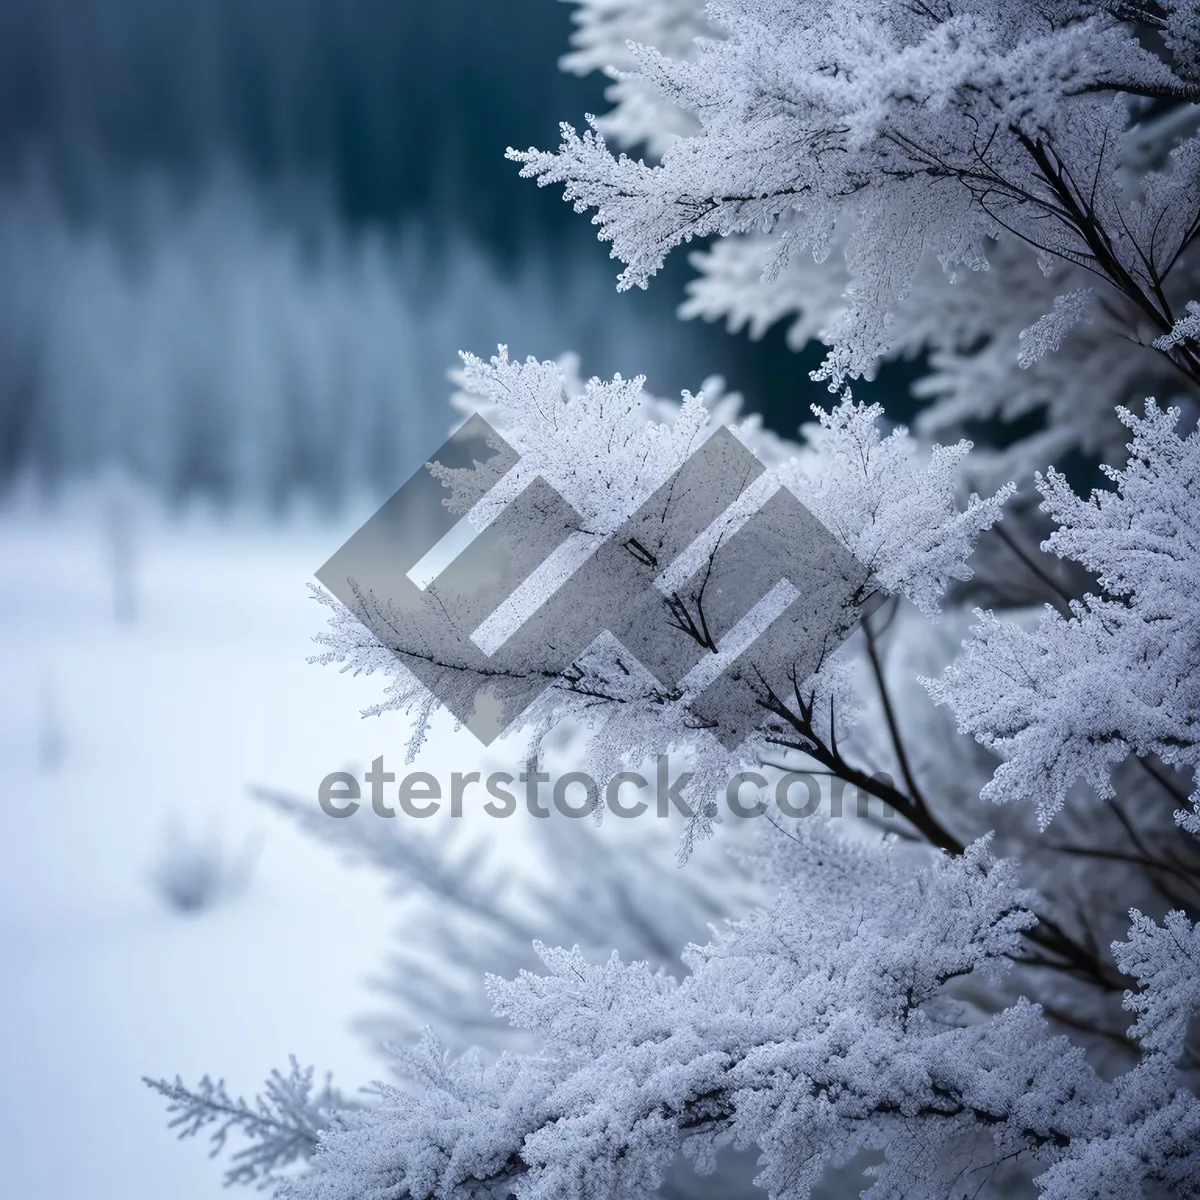 Picture of Winter Wonderland: Frozen Forest Delights with Crystalline Beauty